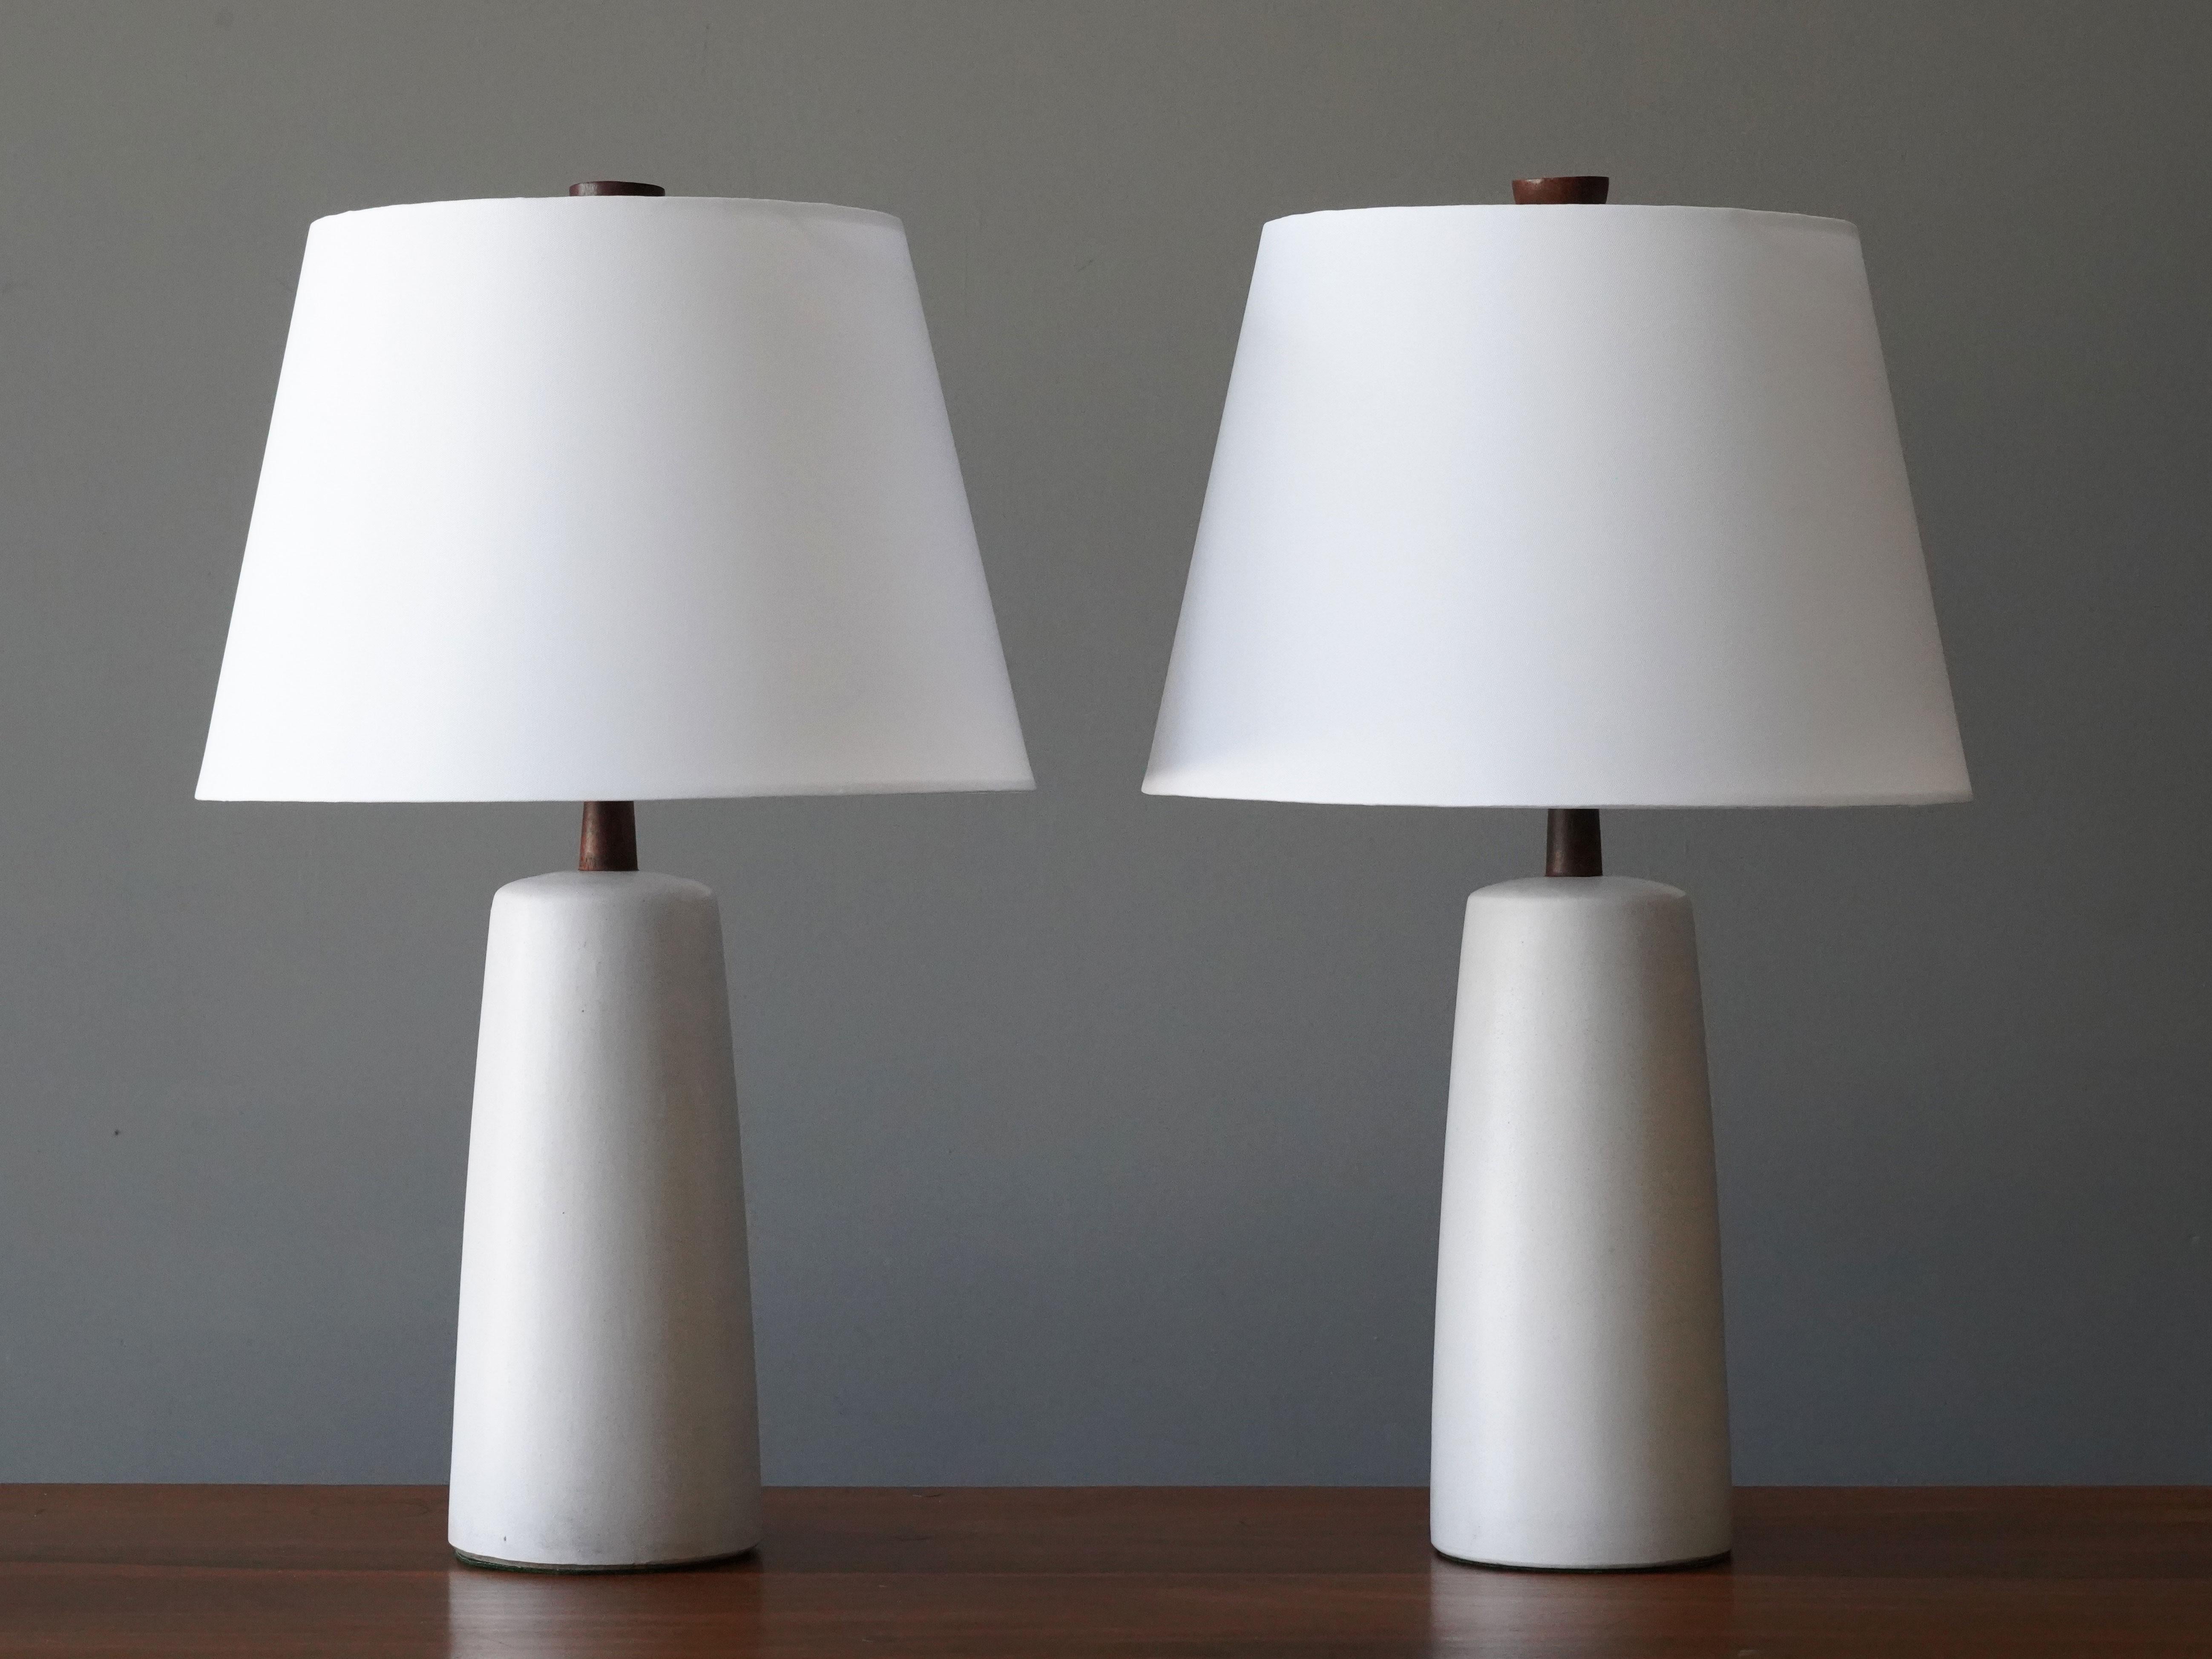 A pair of table lamps designed by husband and wife duo Jane & Gordon Martz. Produced by Marshall Studios, Indianapolis. 

The off white bases are slip-cast and then dipped into glaze. Design also incorporates exquisite walnut necks and finials.